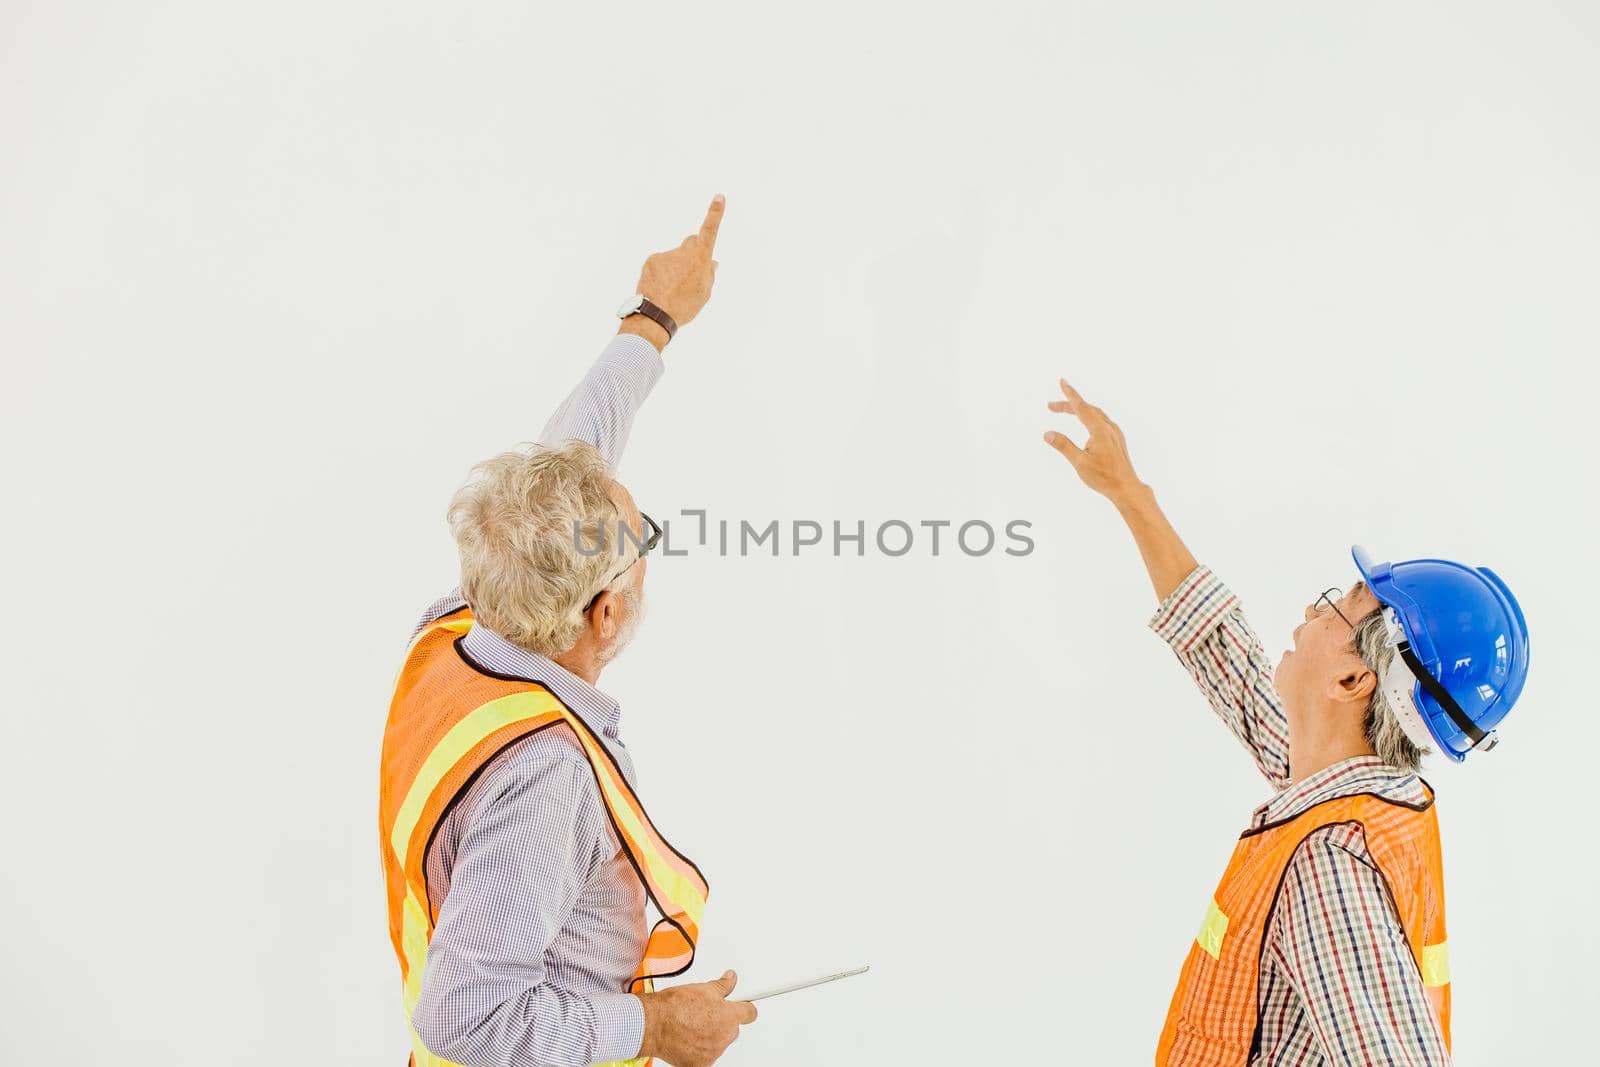 Professional builder working together inspect the ceiling to improve renovate building by qualitystocks